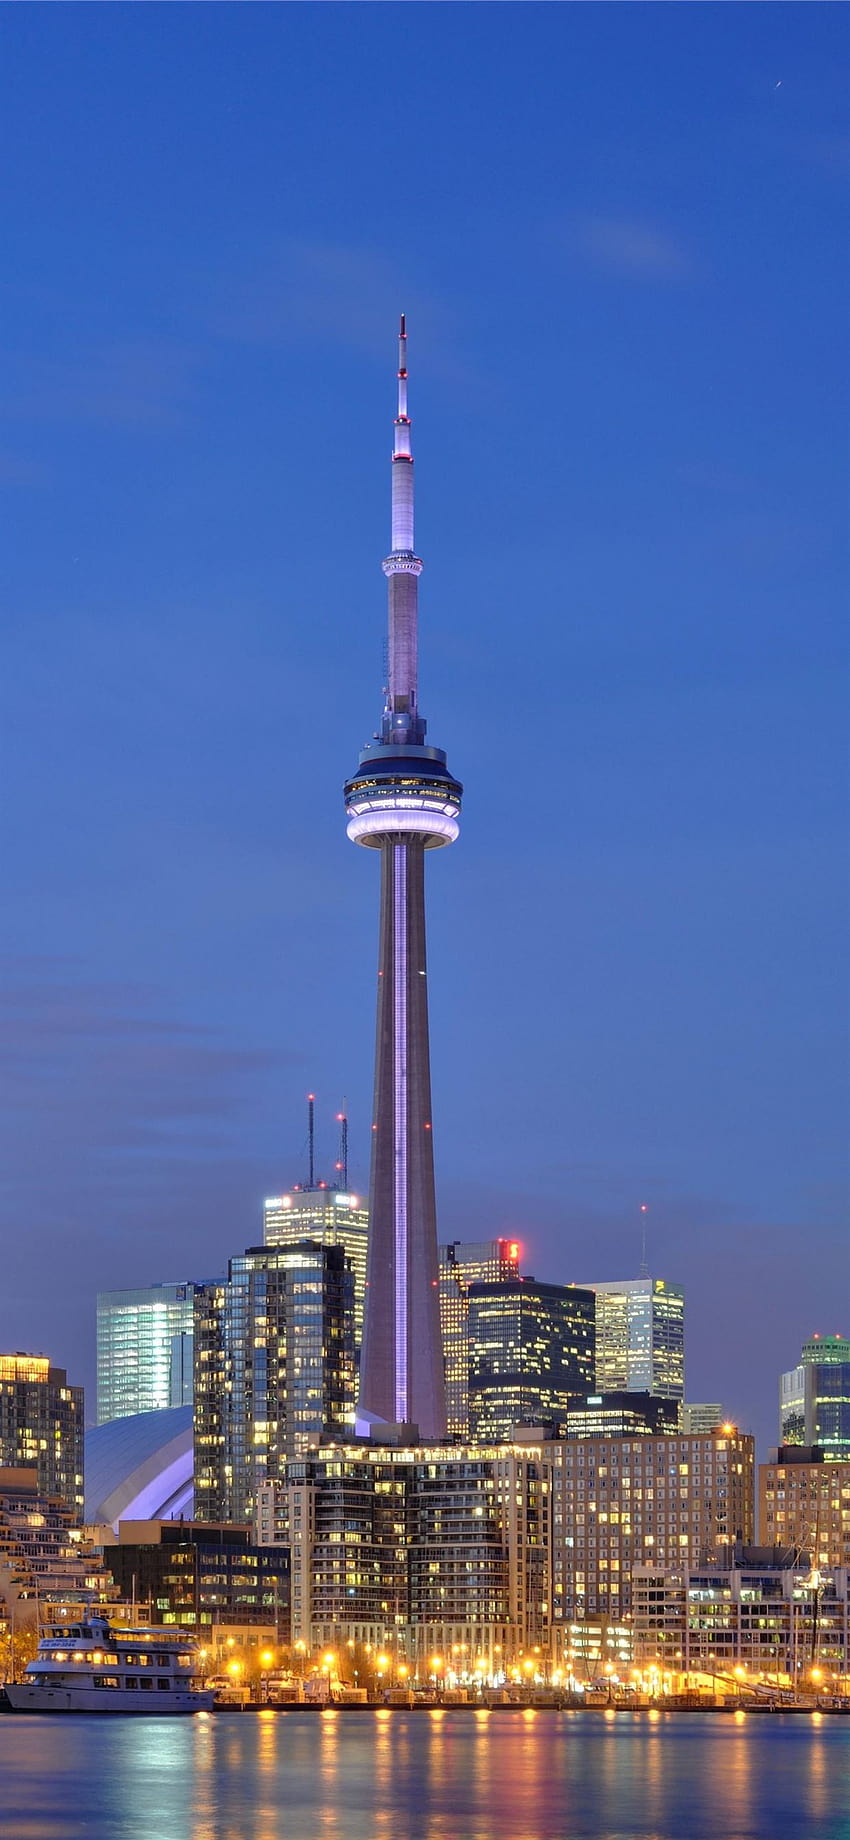 Download wallpaper 1125x2436 toronto cityscape high skyscrapers lights  iphone x 1125x2436 hd background 22566